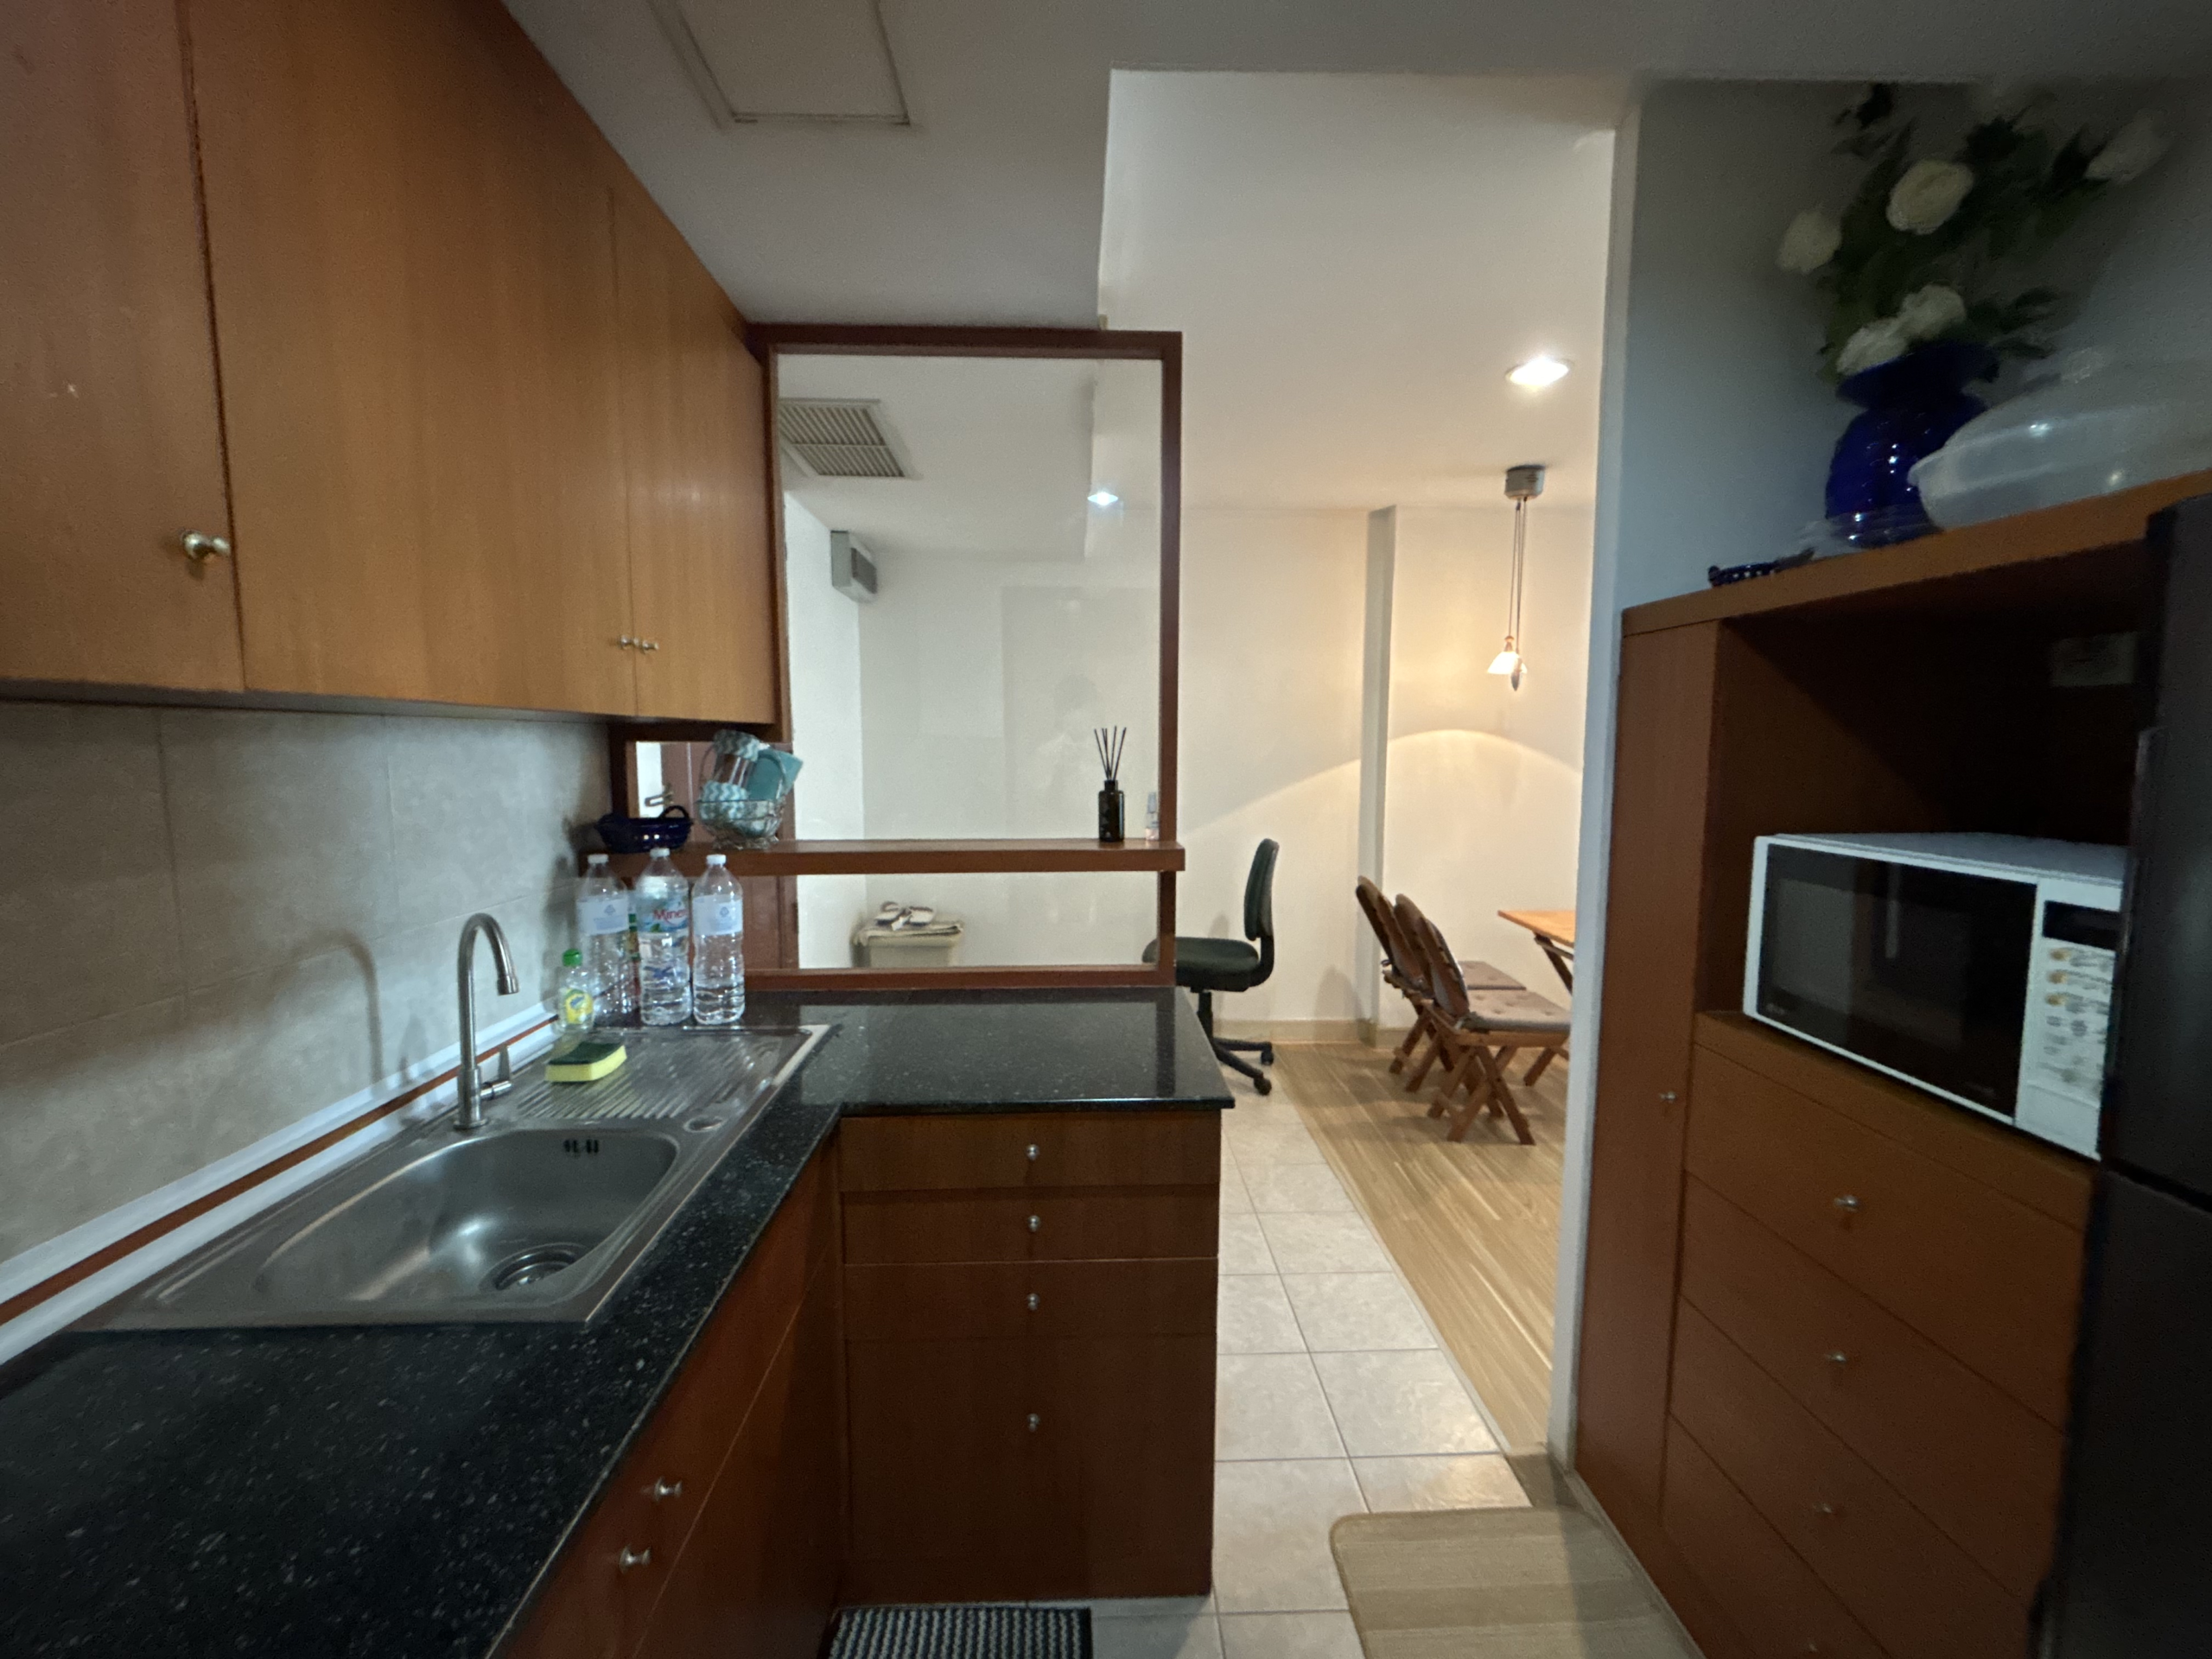 Noble House Phayathai, 1 Bedroom, 18th Floor, 47 Sqm, Sale at 5,000,000.- Rent: 16,000.-